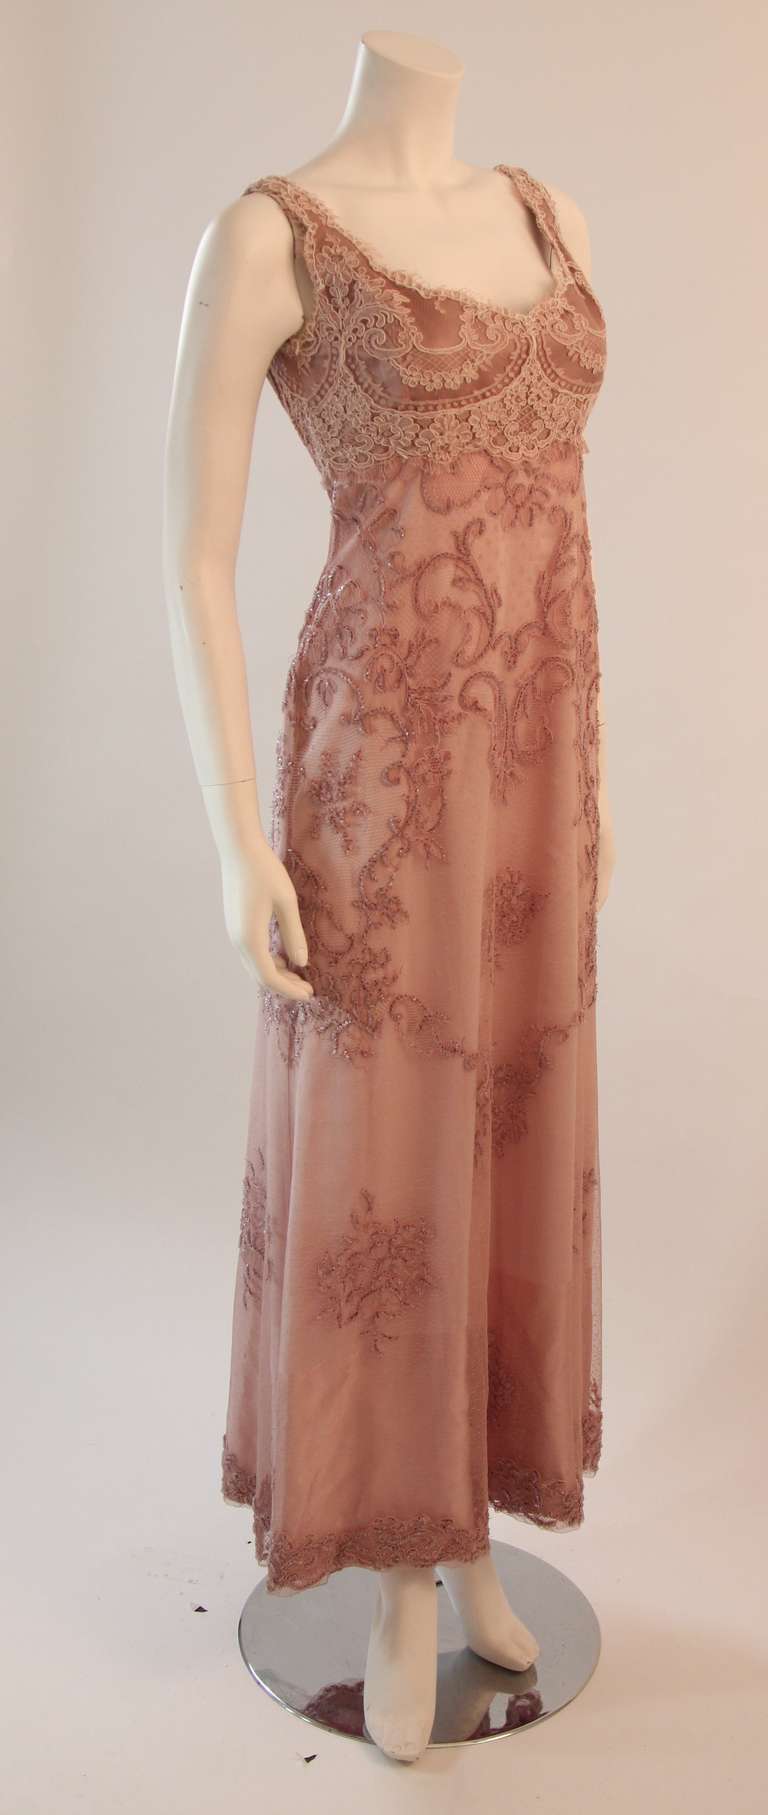 This is a gorgeous Badgley Mischka gown. A wonderful pink mauve hued lace with beading. A beautiful classic gown with scallop details along the neckline and a hidden side zipper.

Please feel free to telephone us with any questions, or if you wish